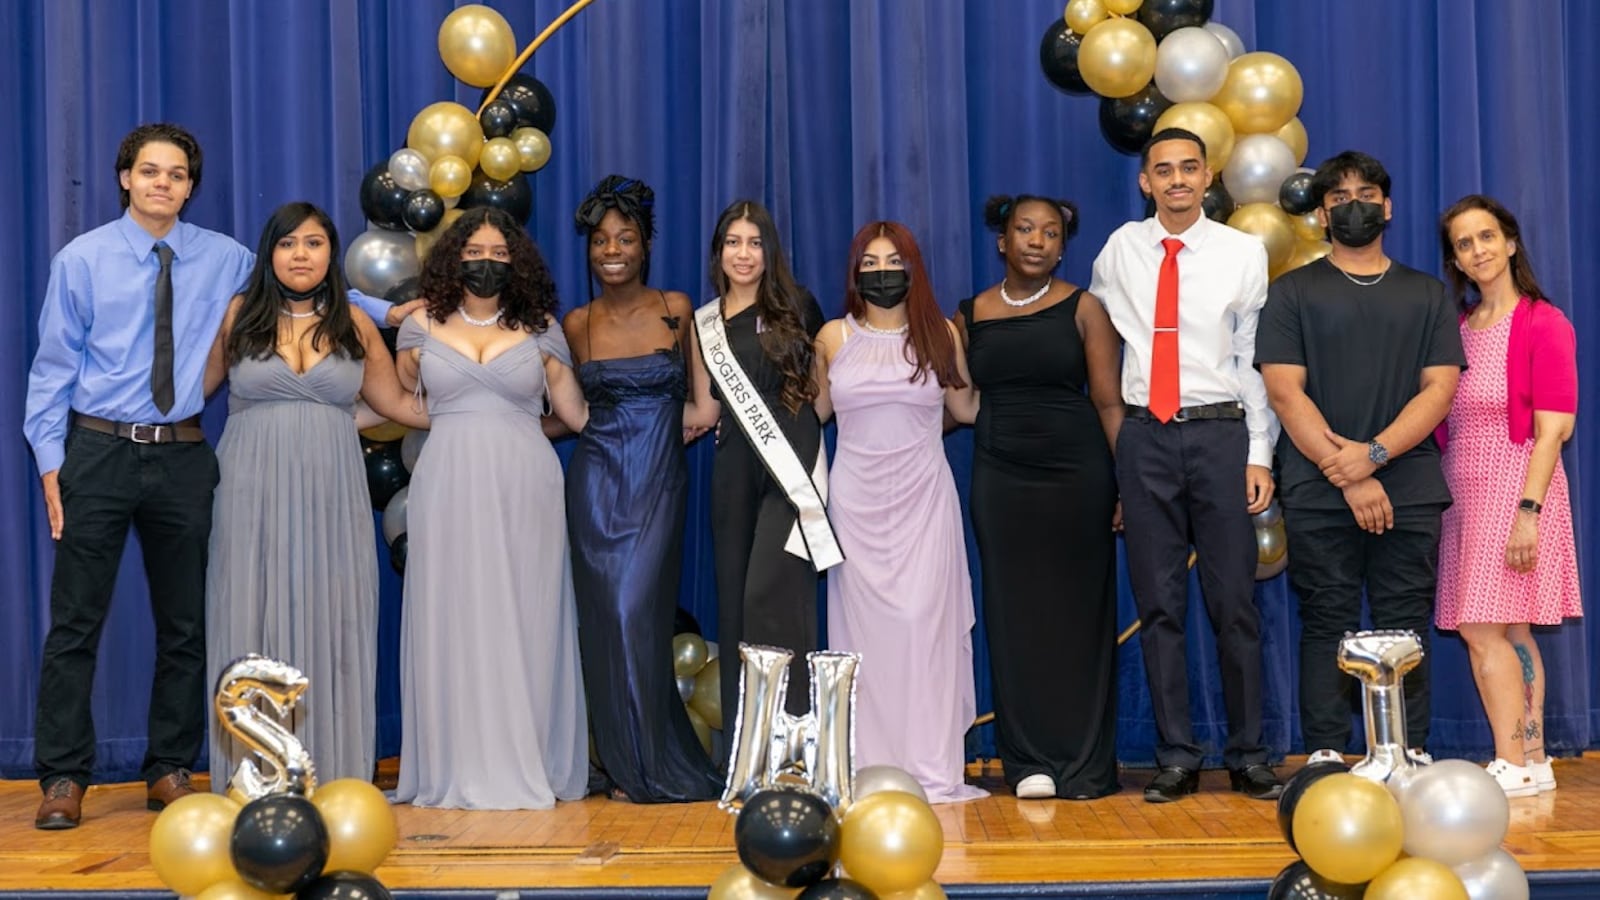 Students in prom attire pose for a portrait together on a stage with a blue curtain in the background, surrounded by celebratory gold and black balloons.